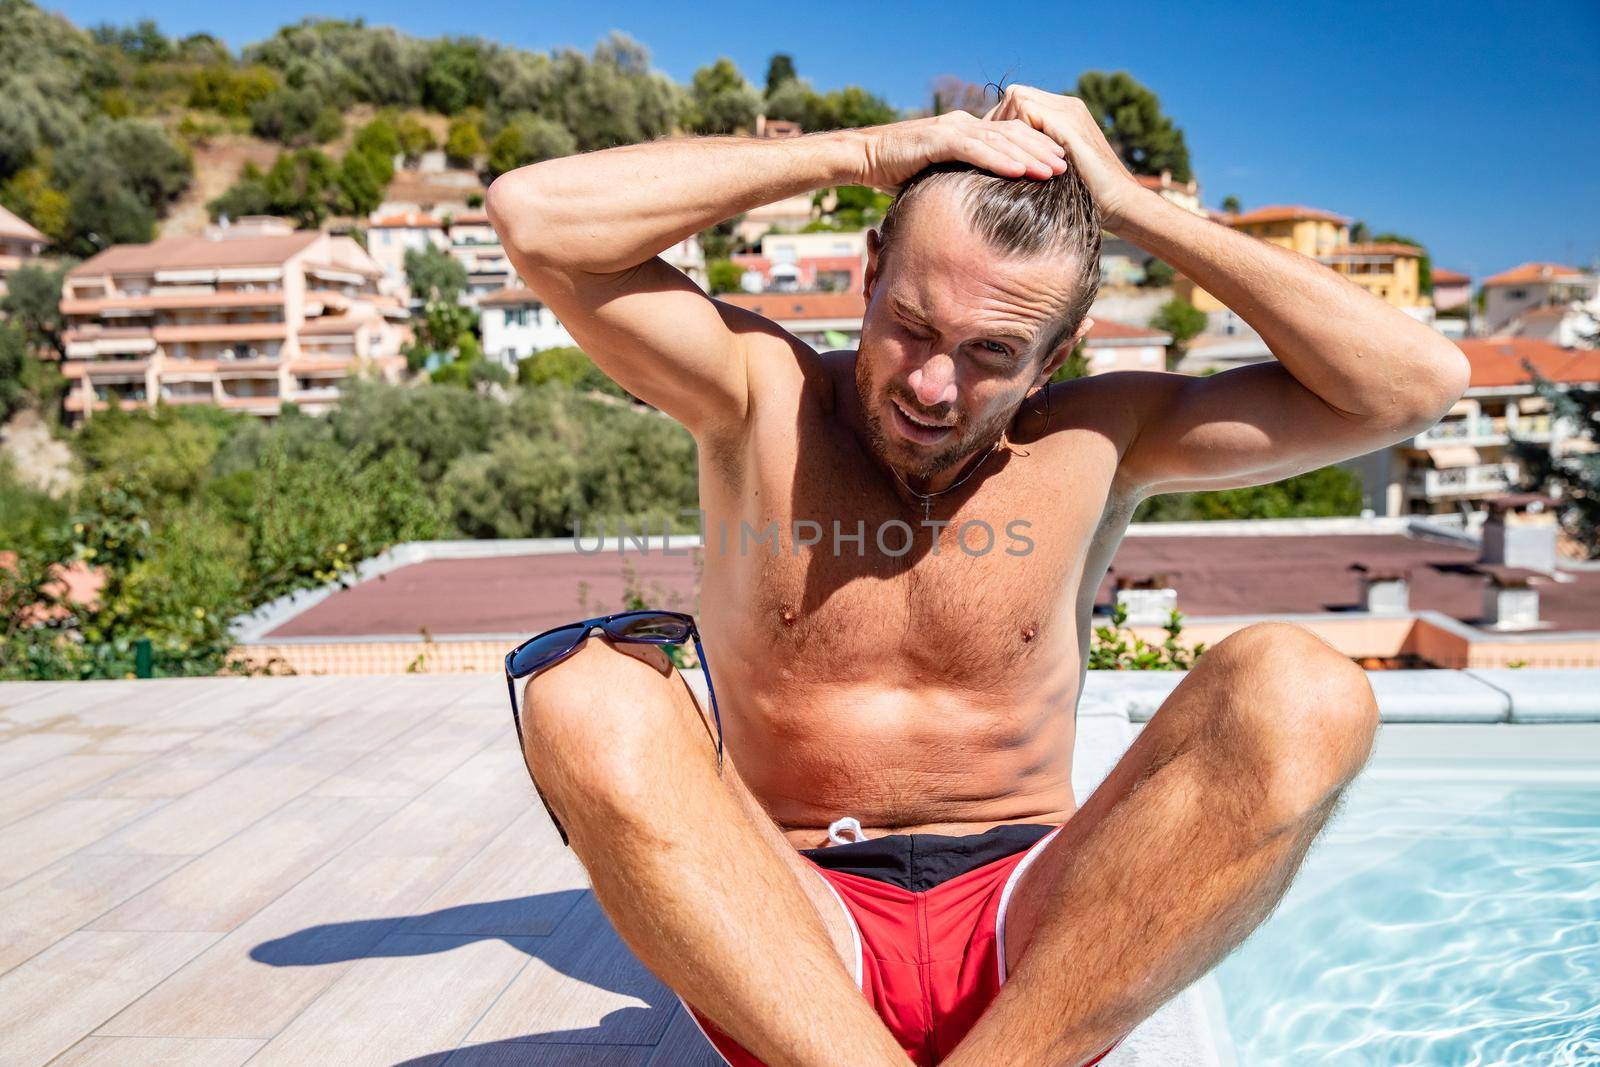 The handsome brutal man in sunglasses with a long hair and naked torso sits near the pool, a sports suntanned body, sunglasses with a blue frame, he is red blue swimming shorts, sunny day